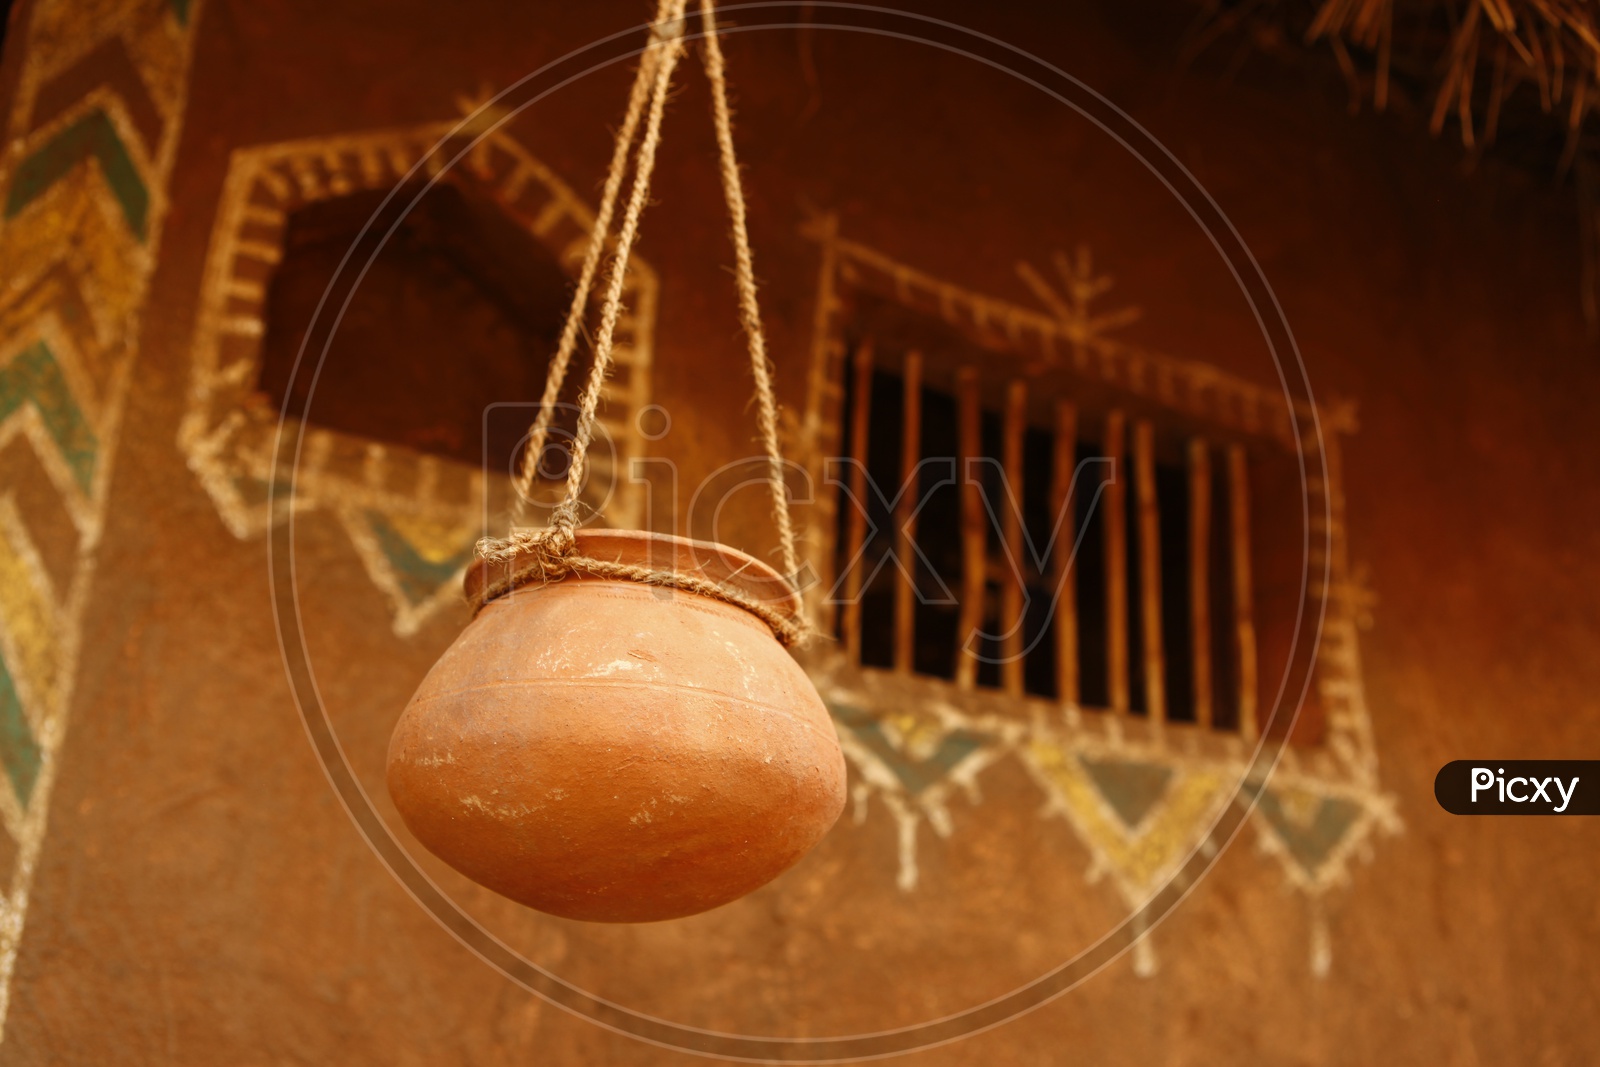 Hanged clay curd pot using a rope